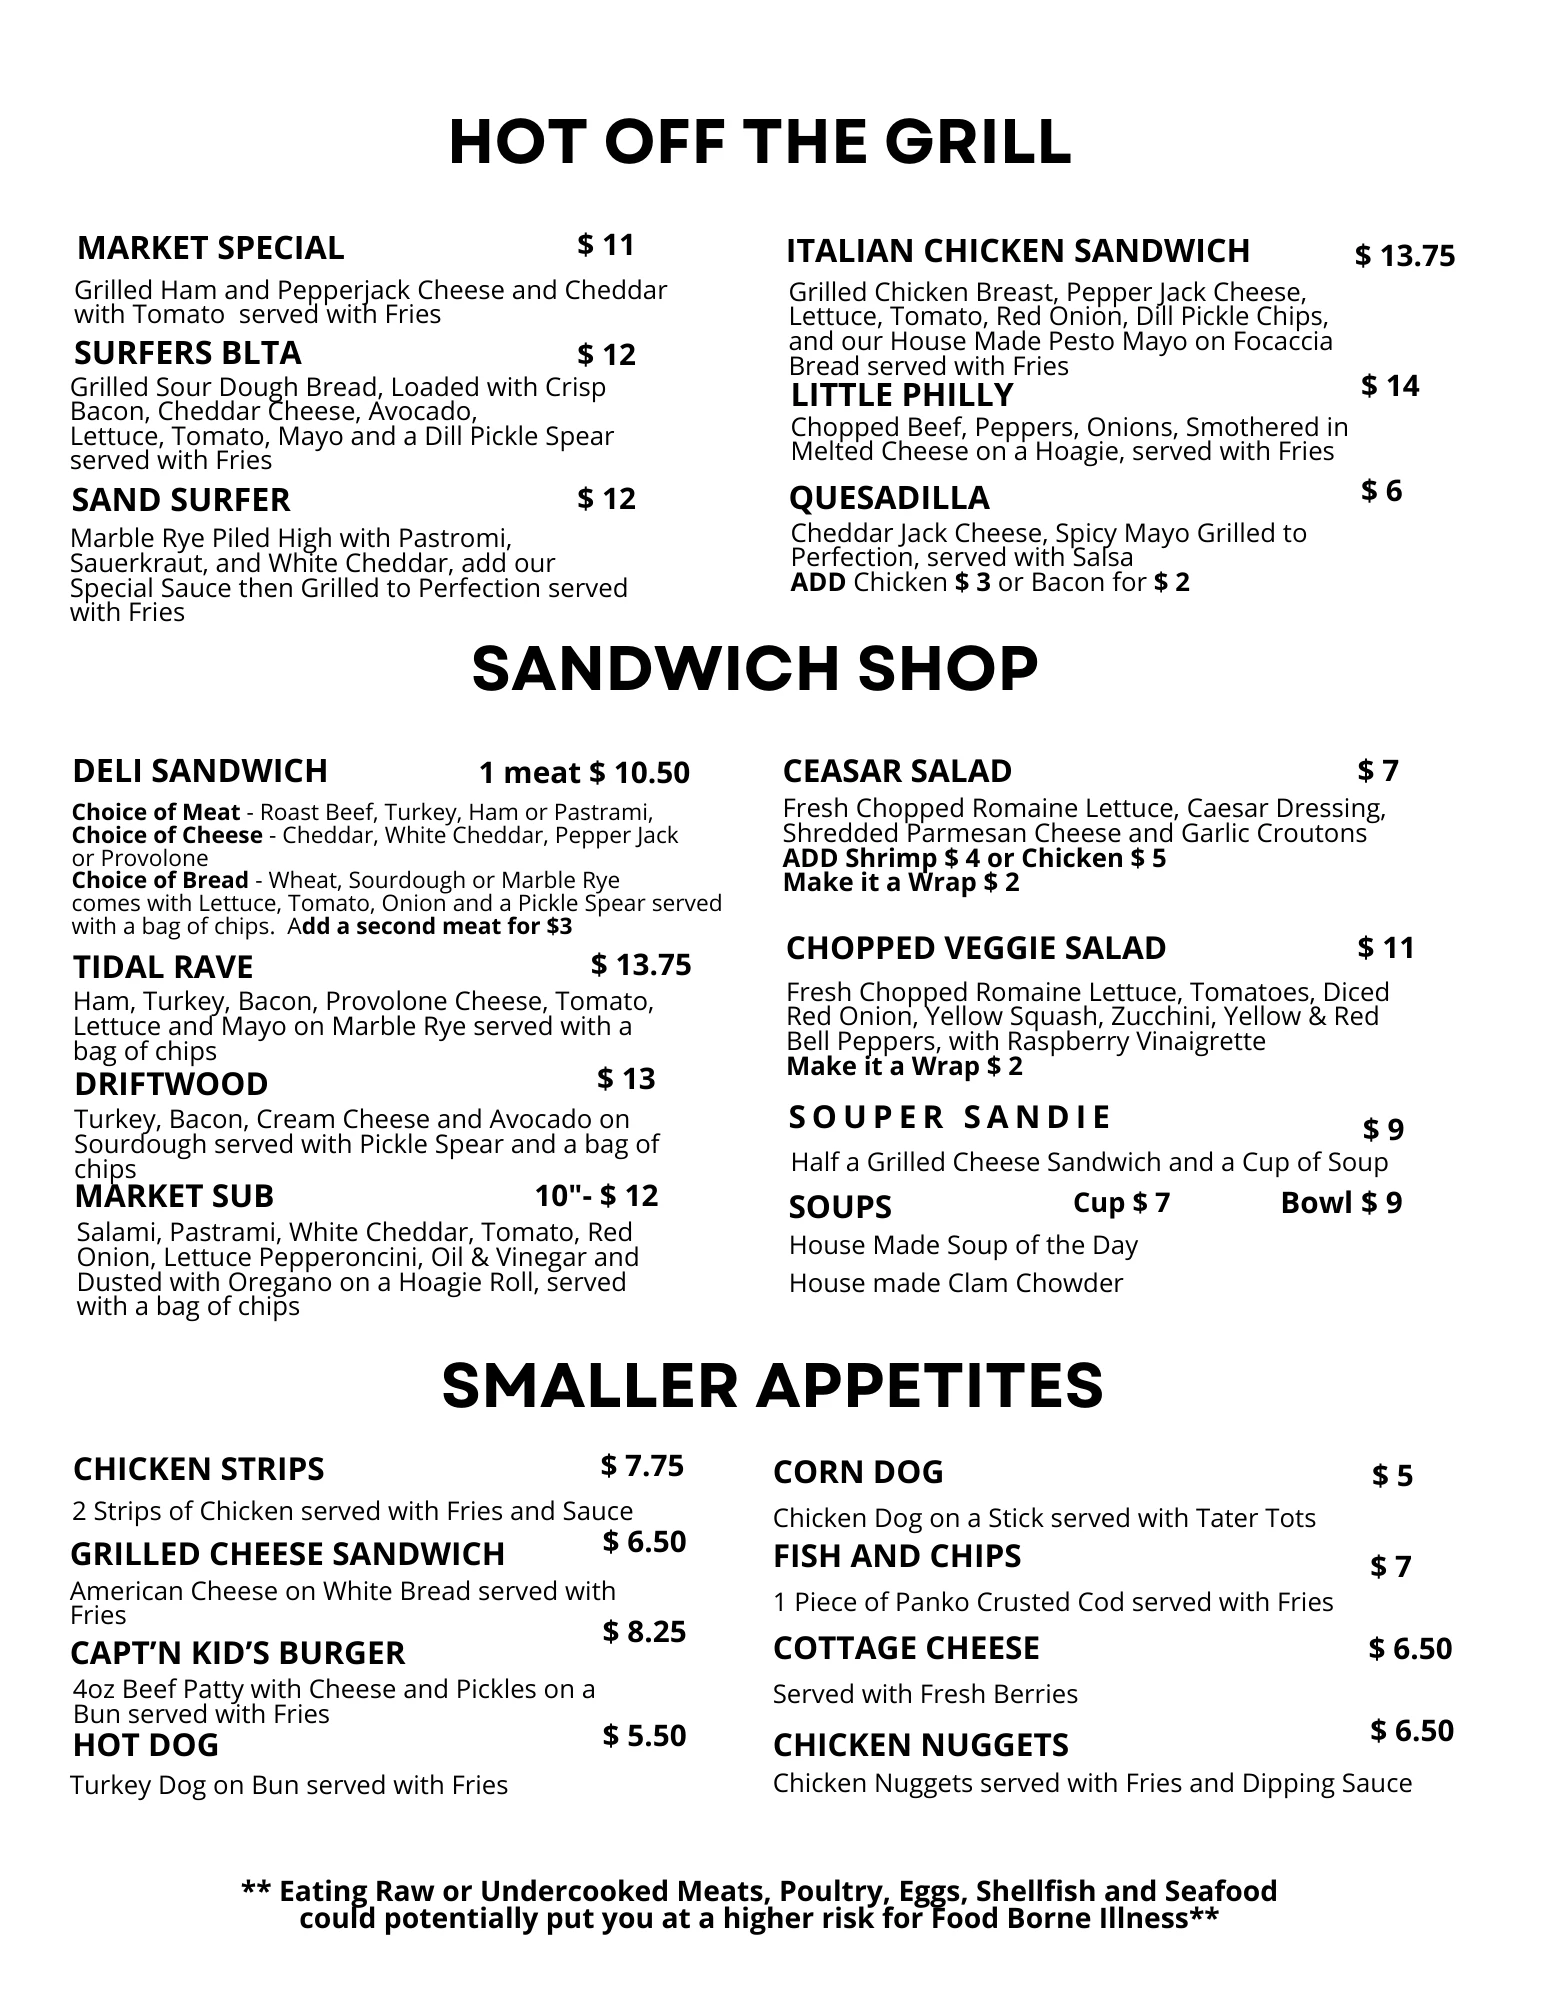 This is a menu featuring sections like "Hot Off The Grill," "Sandwich Shop," and "Smaller Appetites" with various food items and prices listed.